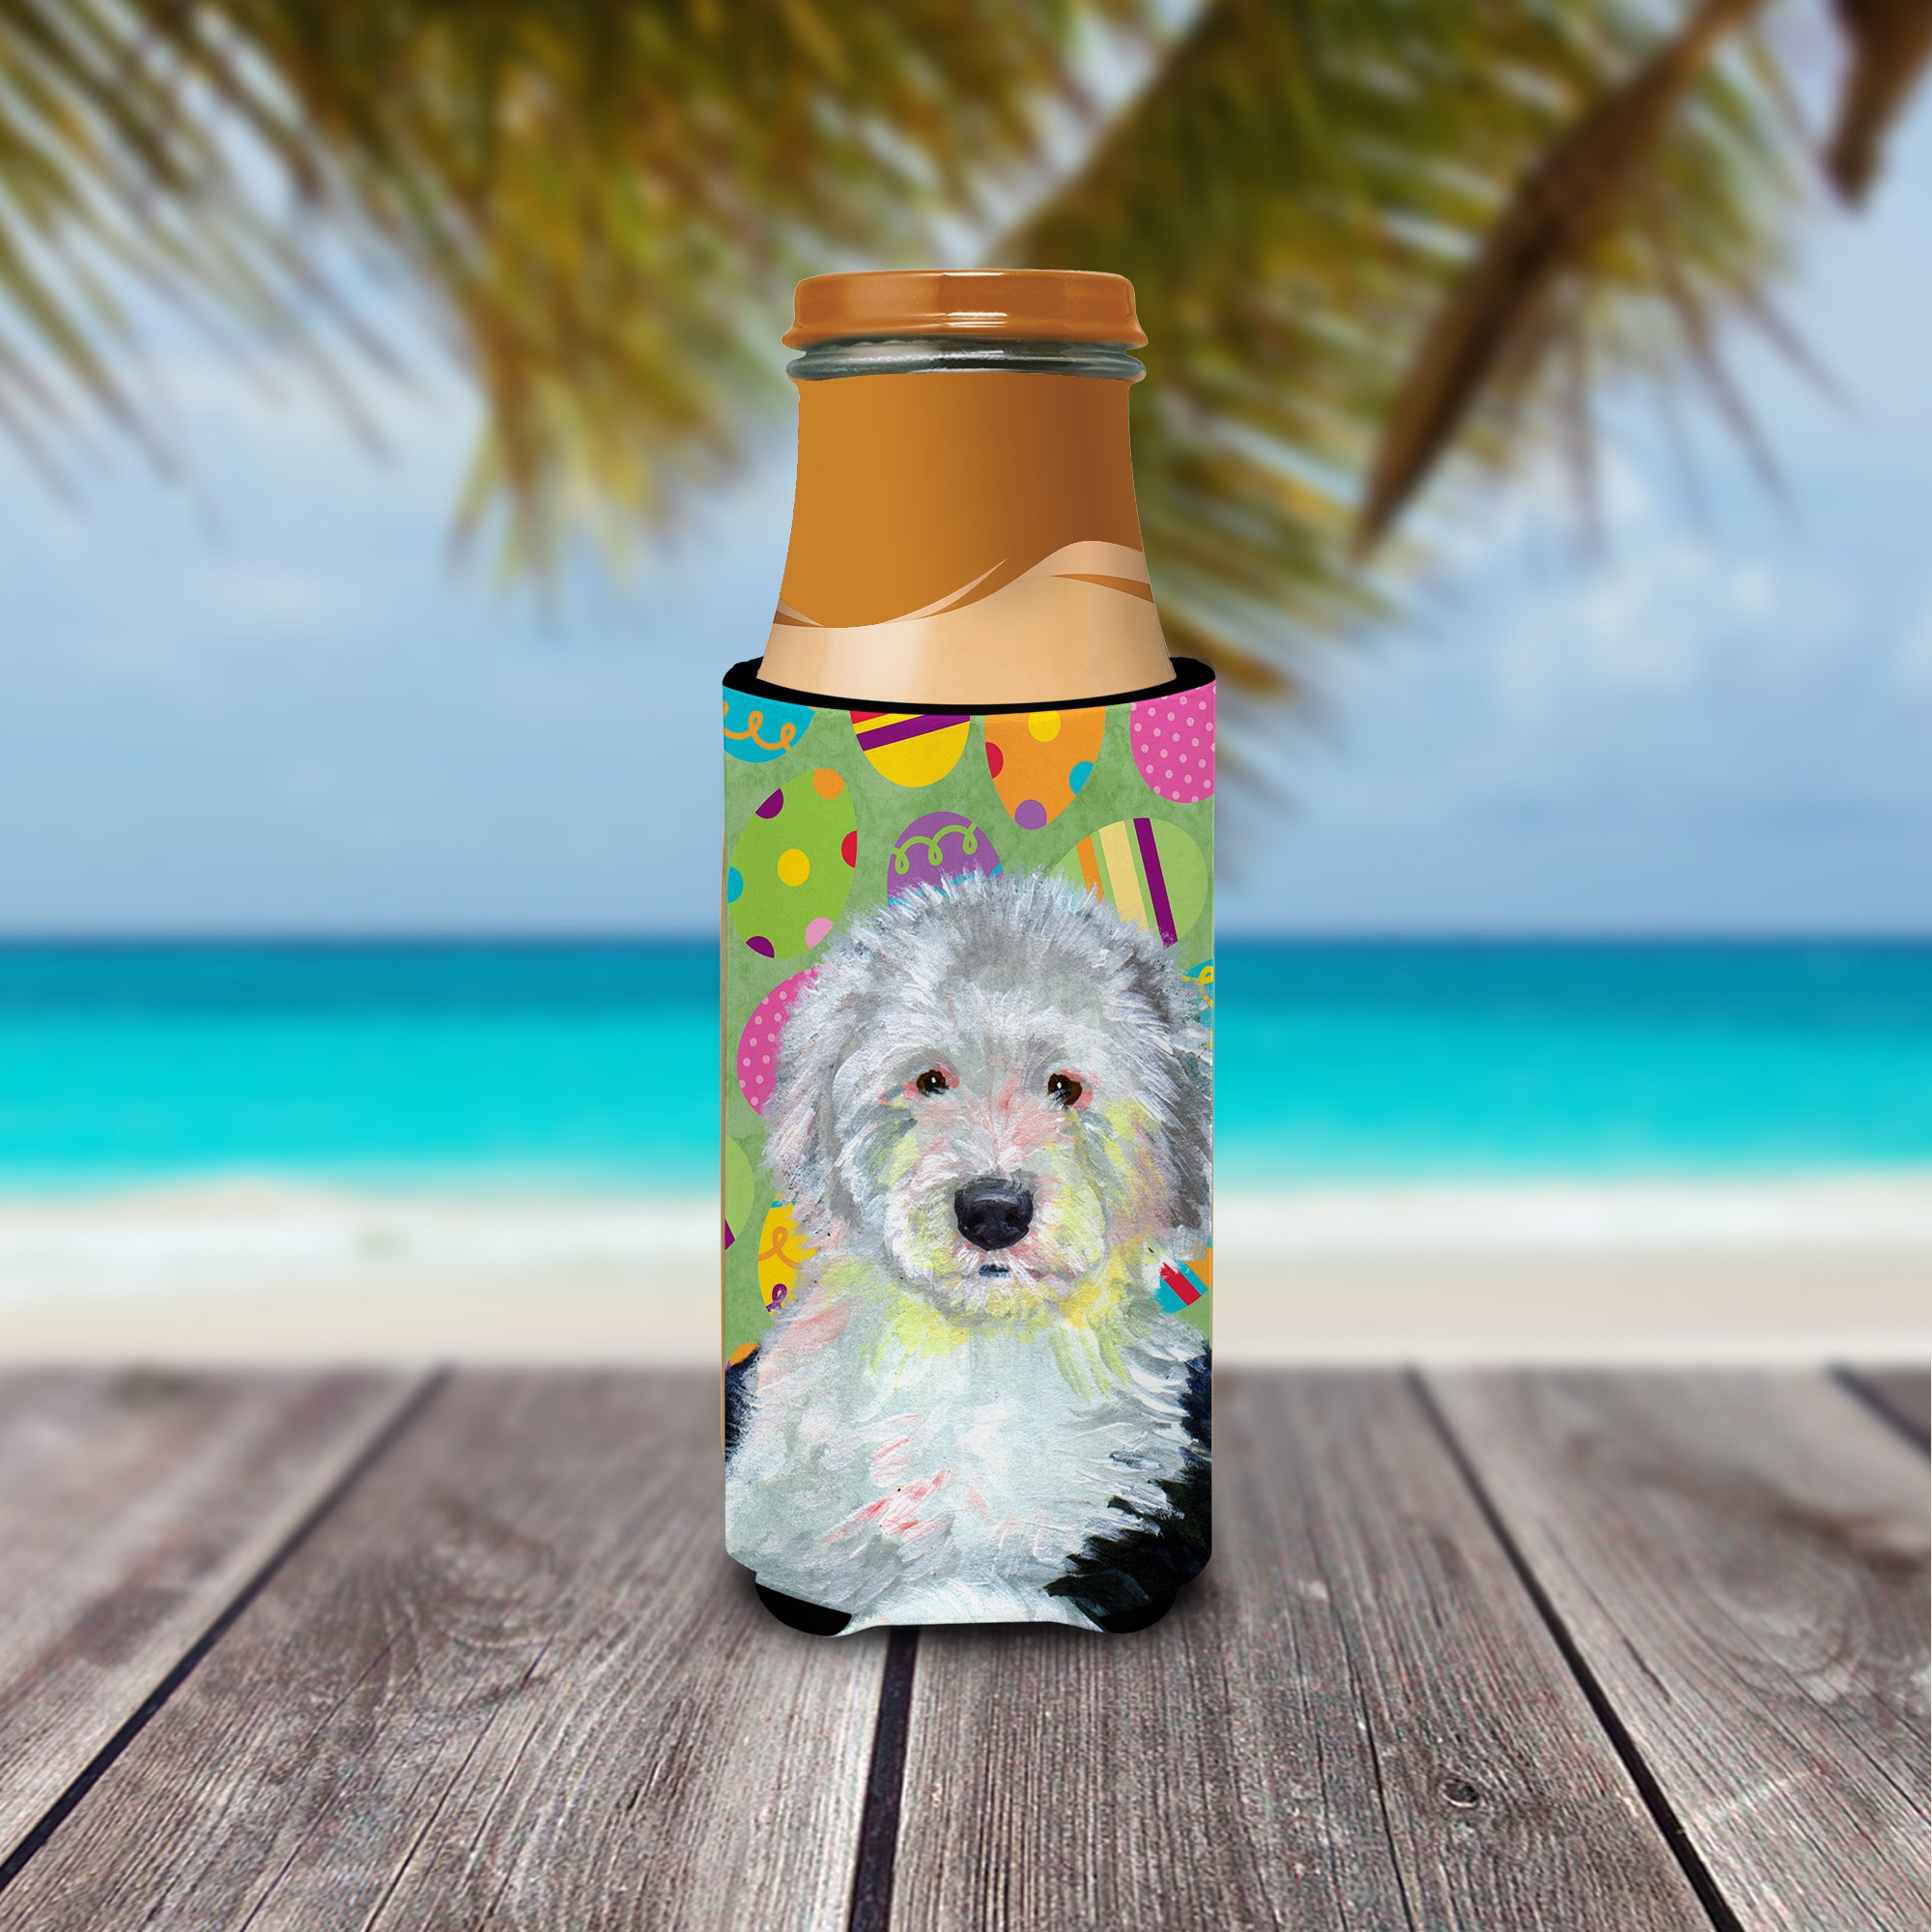 Old English Sheepdog Easter Eggtravaganza Ultra Beverage Insulators for slim cans LH9441MUK.